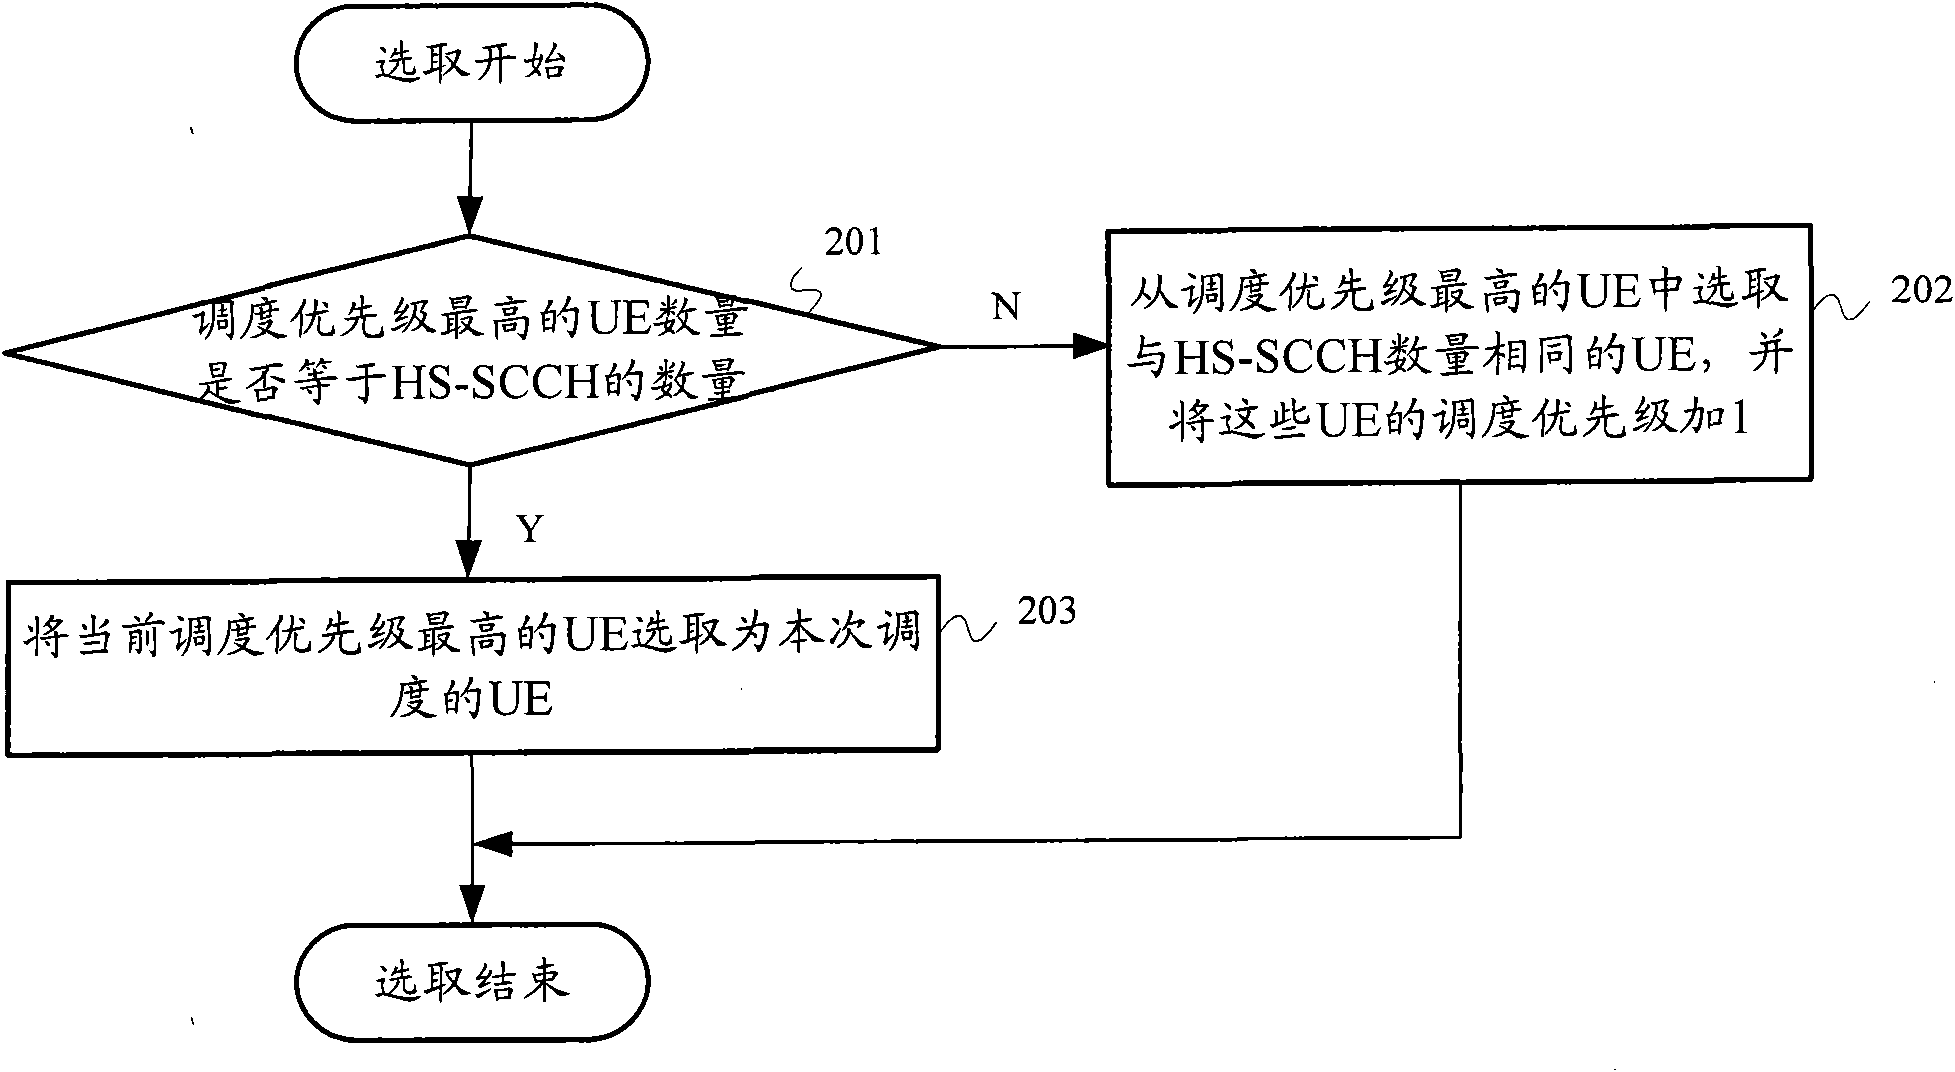 Resource scheduling method and device based on HSDPA (high speed downlink packet access)